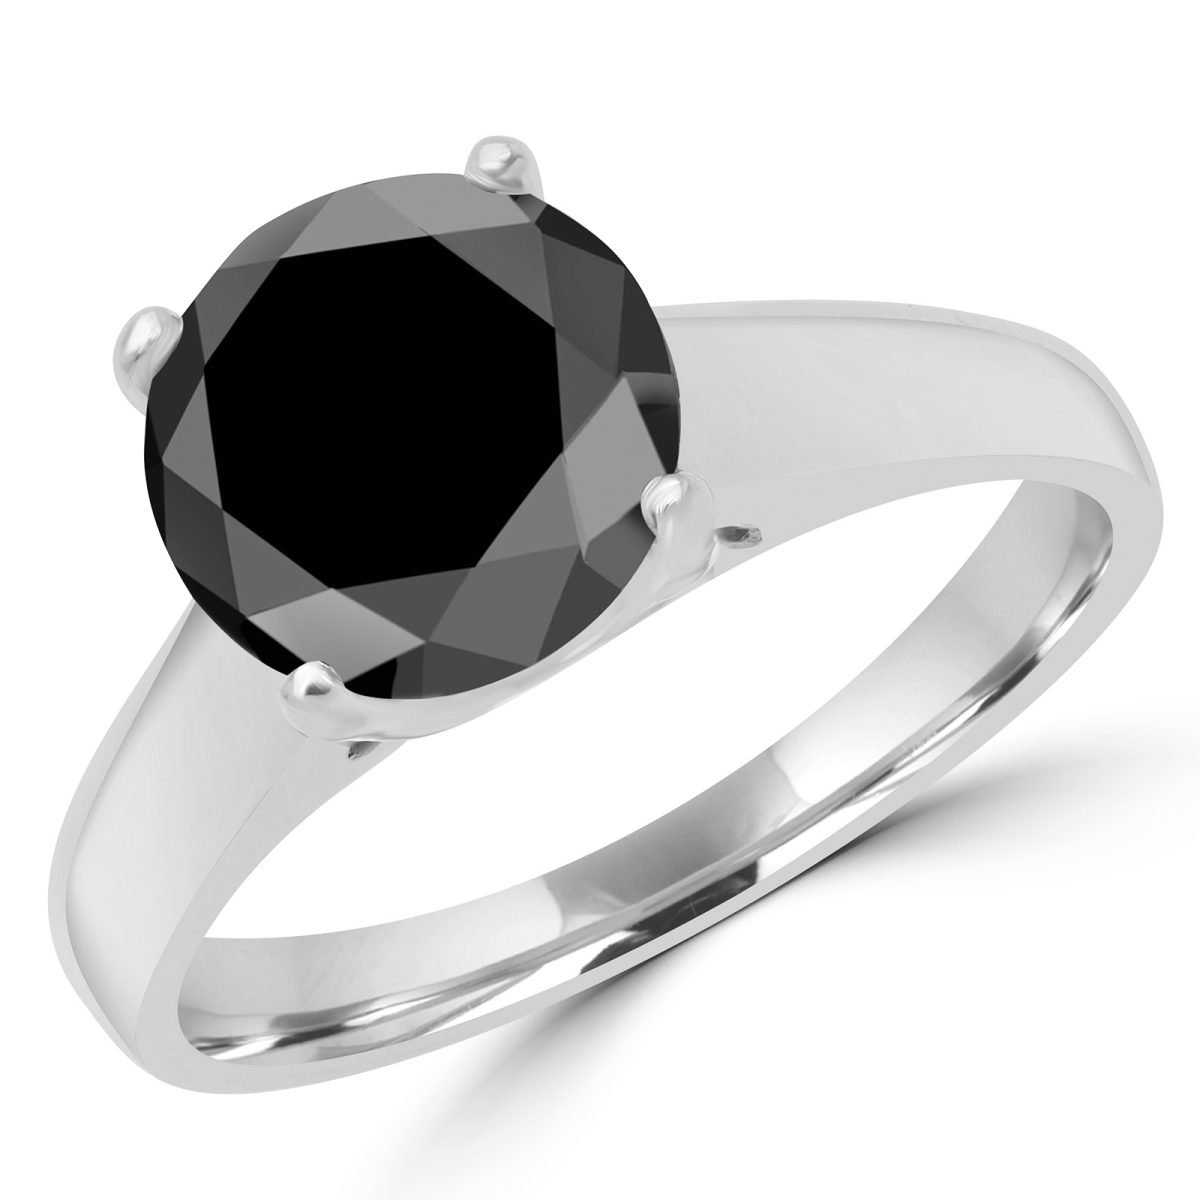 Picture of Majesty Diamonds MD170224 1.5 CT Round BlacK Diamond Solitaire Engagement Ring in 14K